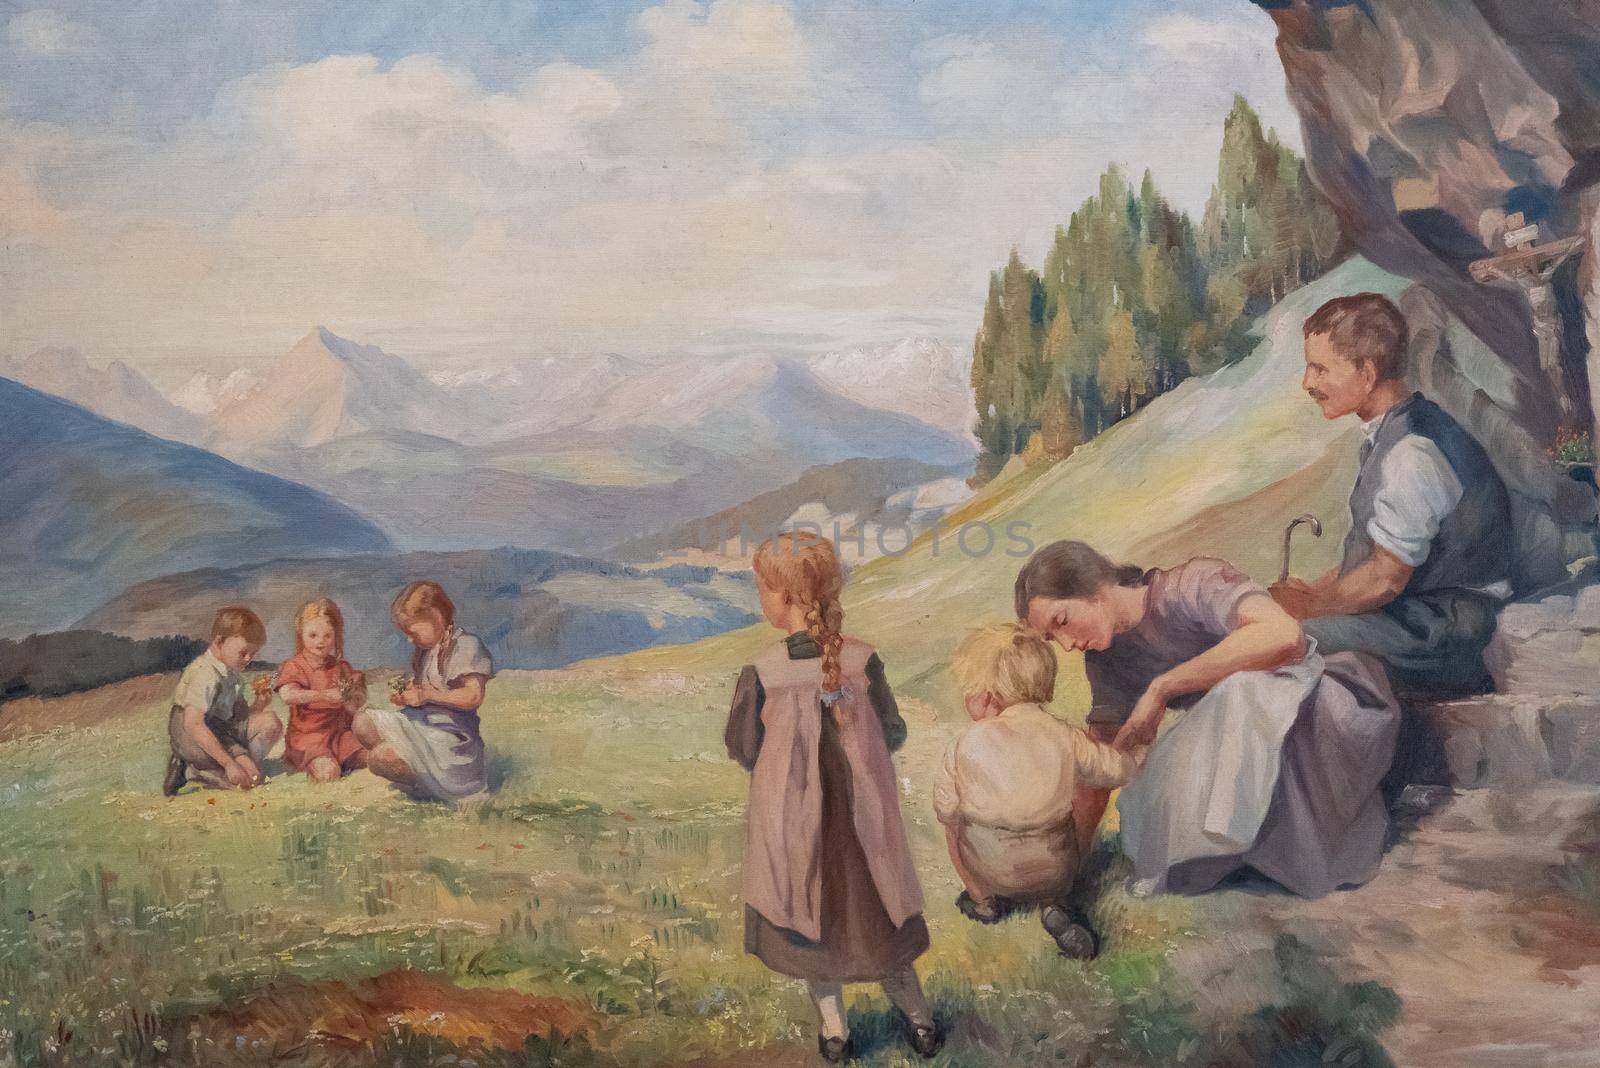 Family image that stands on mountain meadows, horizontal image